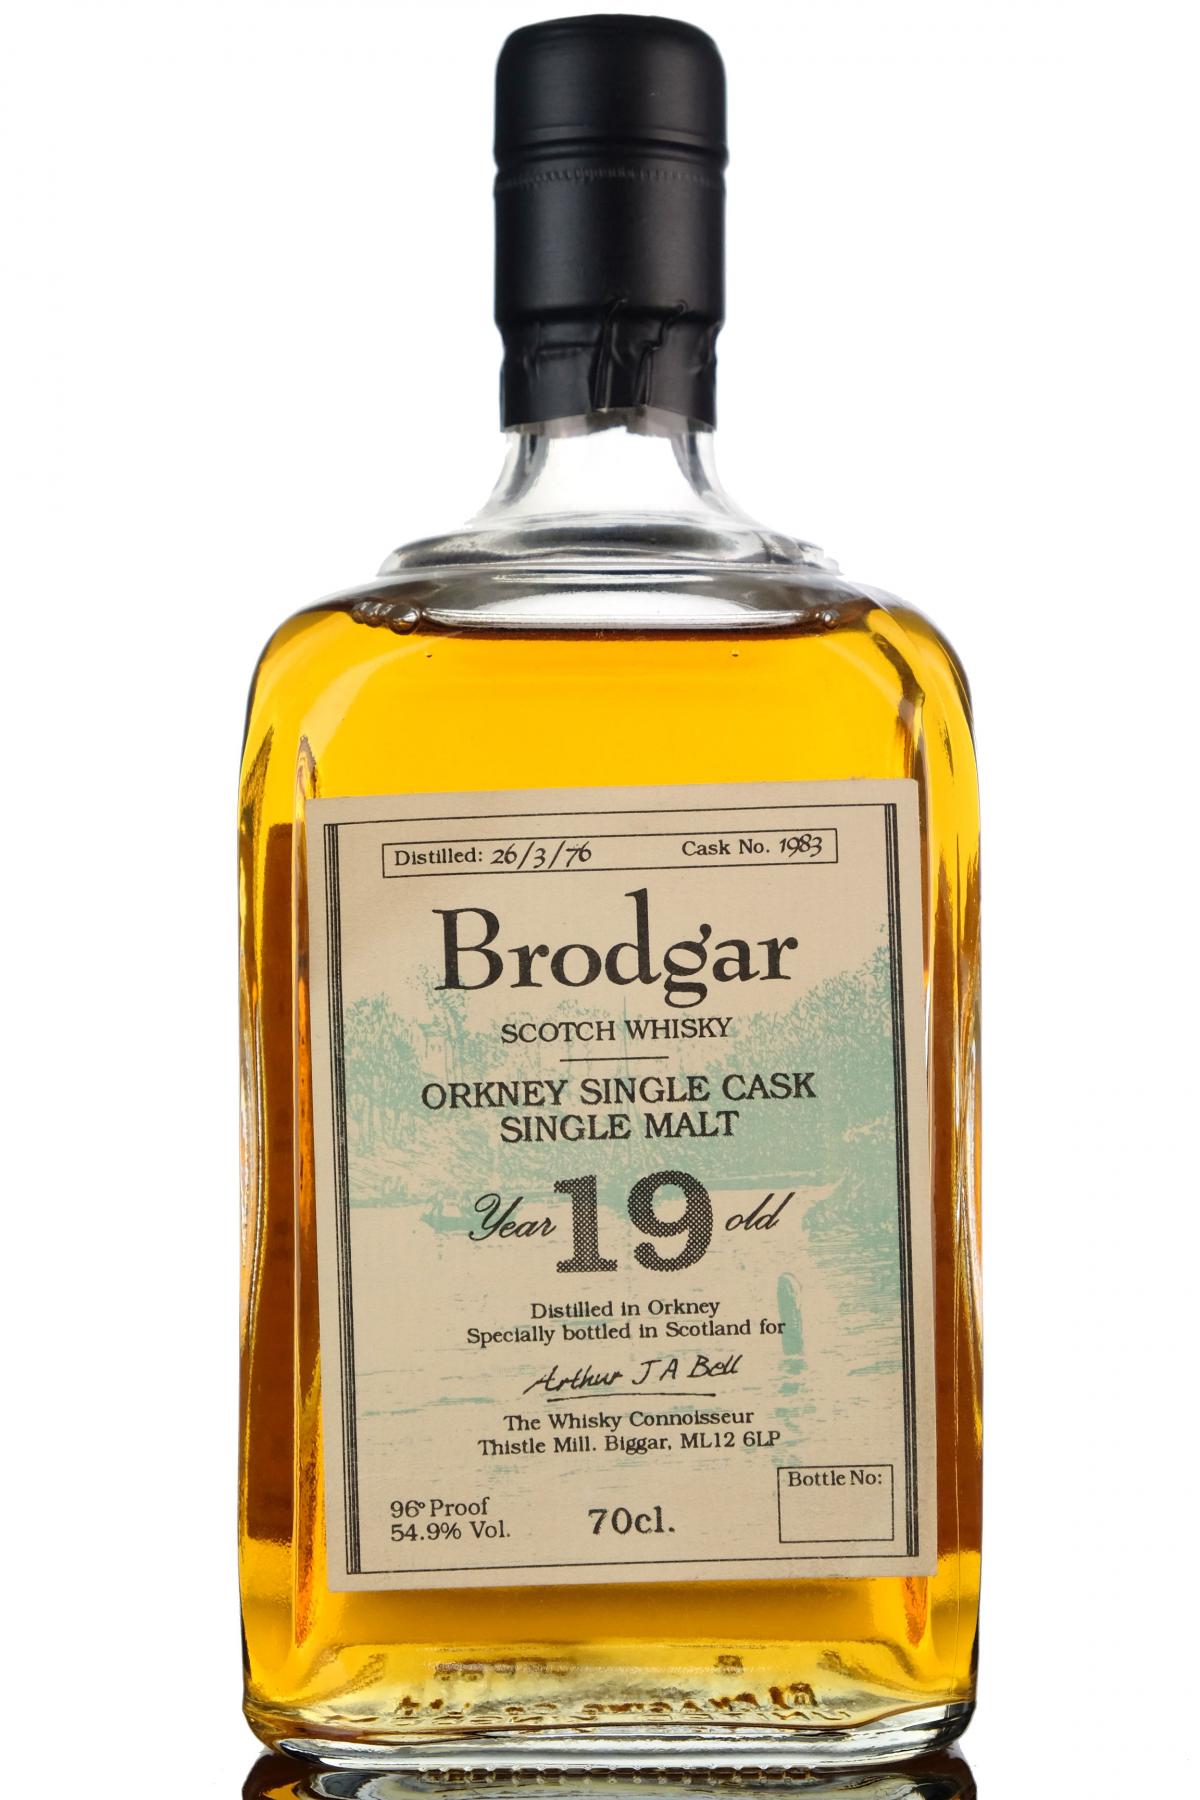 Brodgar Highland Park 1976 - 19 Year Old - The Whisky Connoisseur